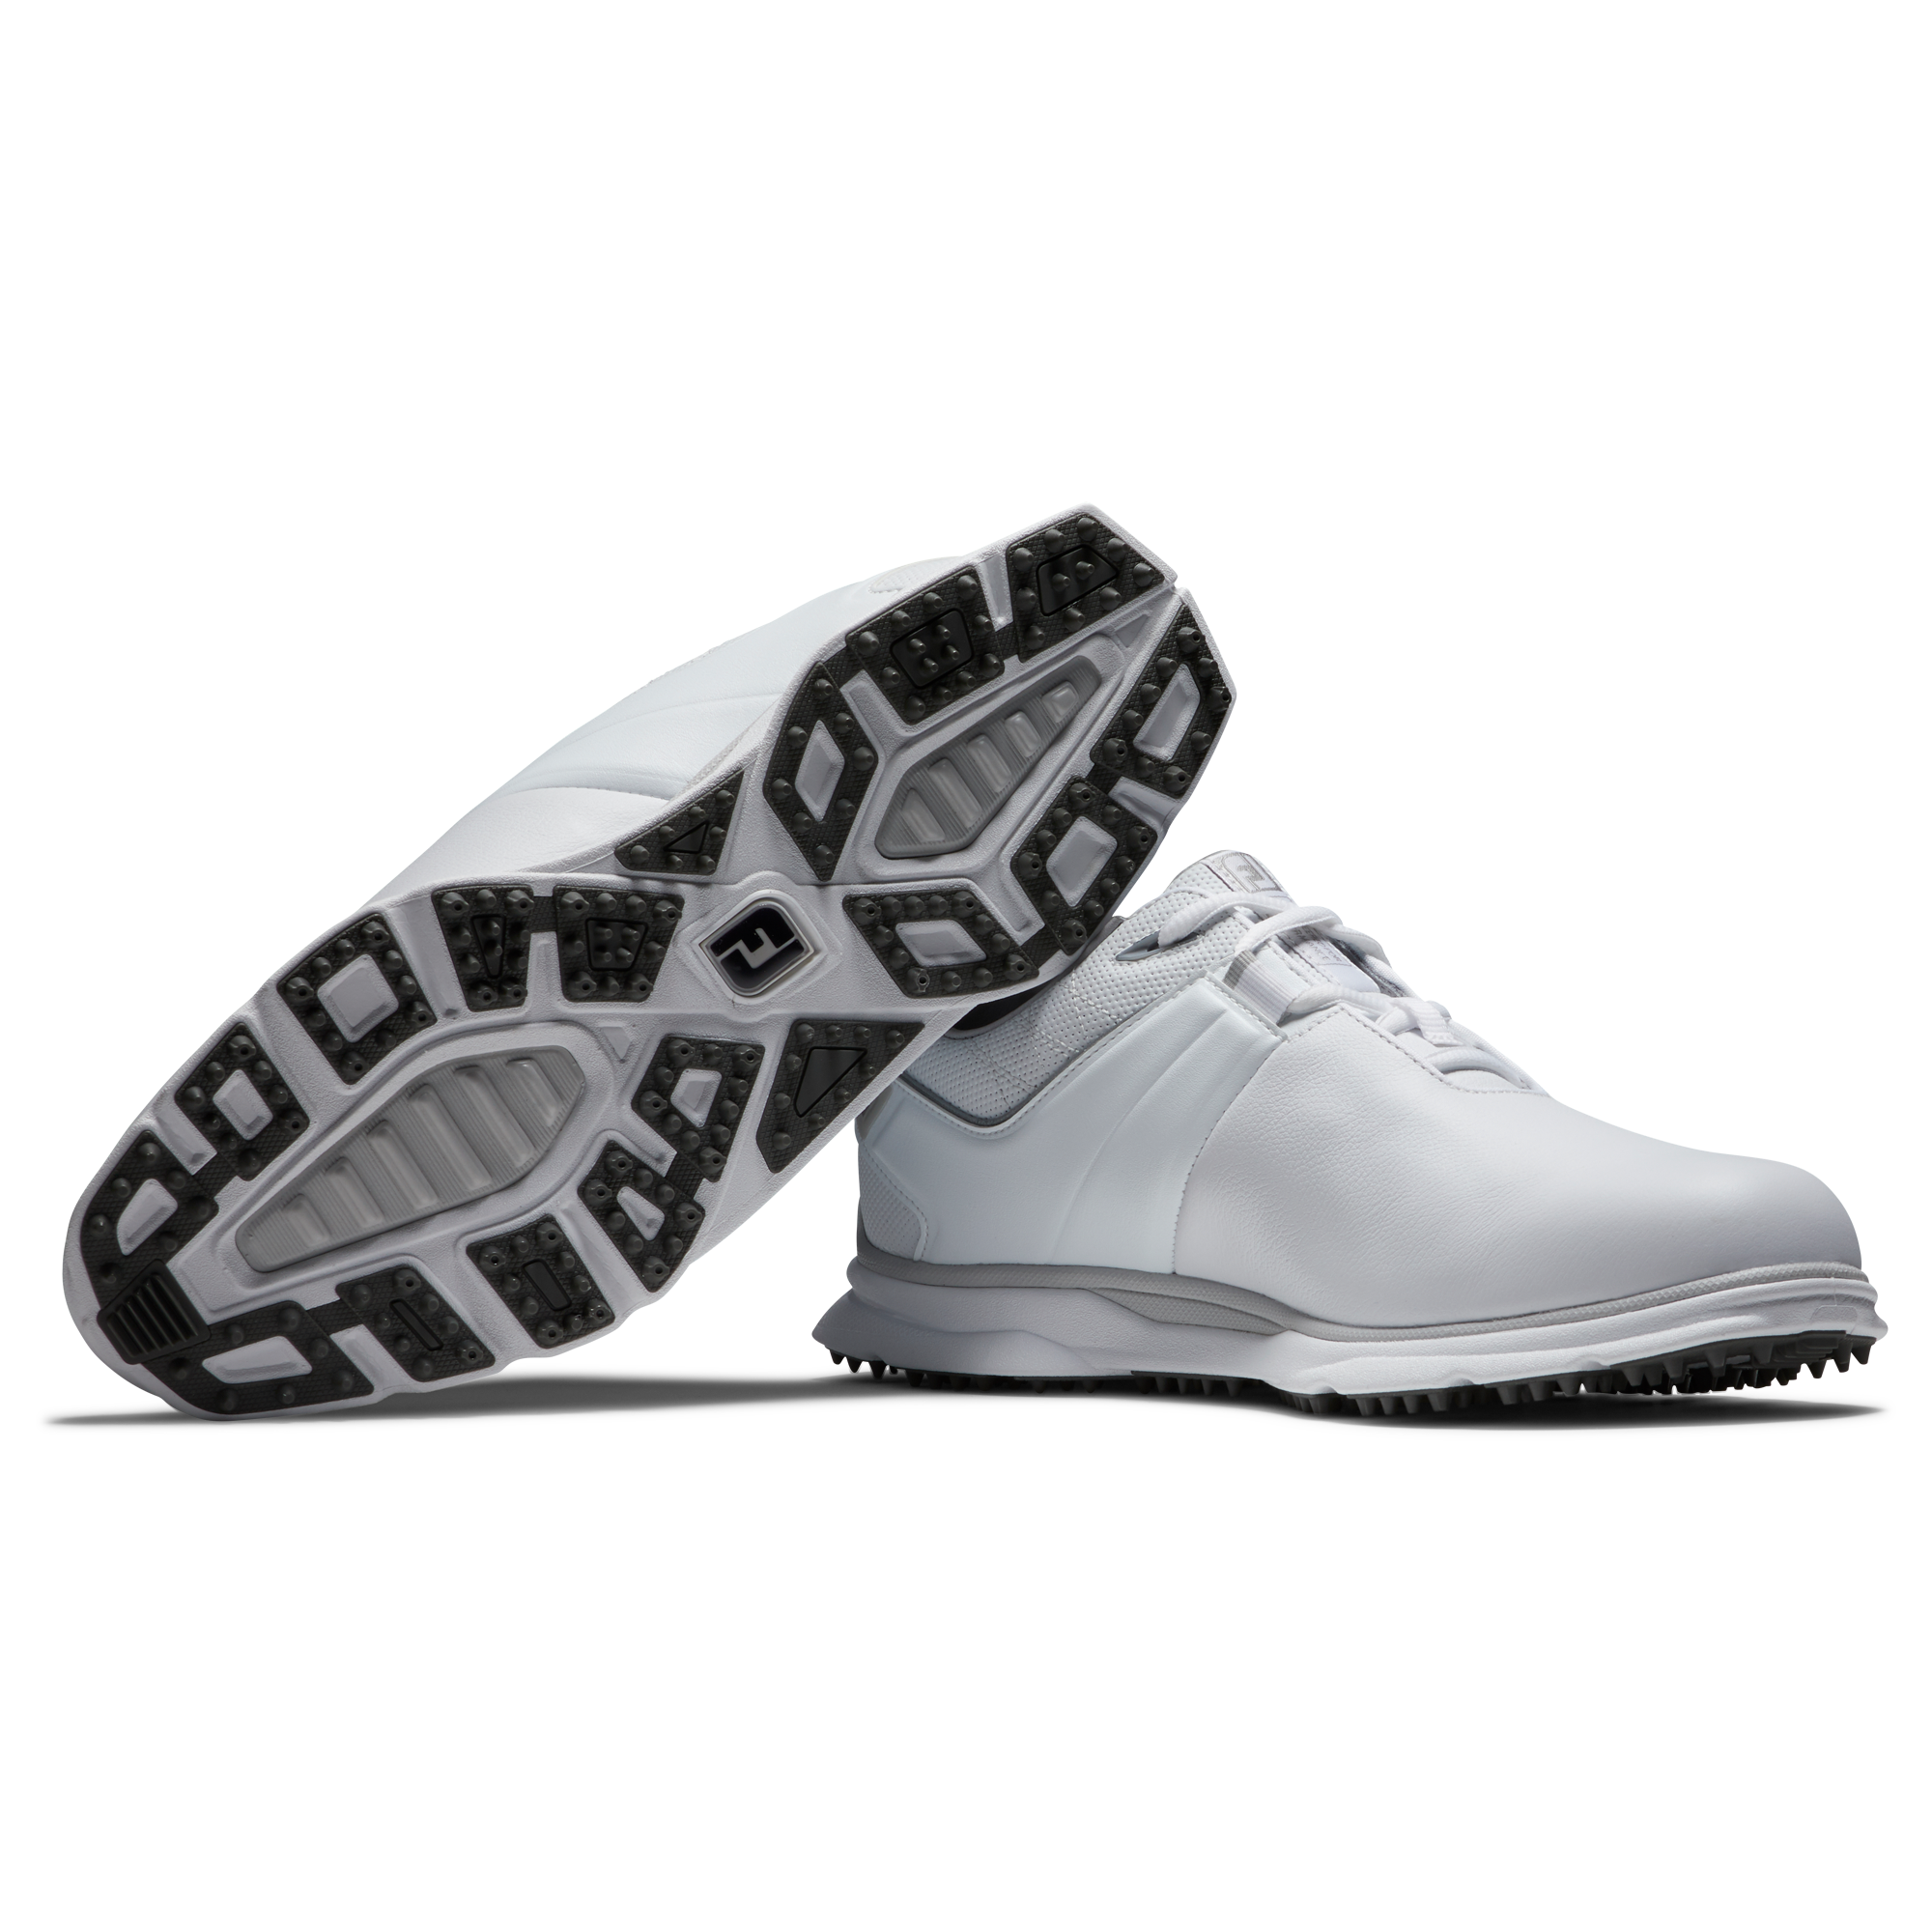 Pro|SL | Our Most Comfortable Spikeless Golf Shoes | FootJoy